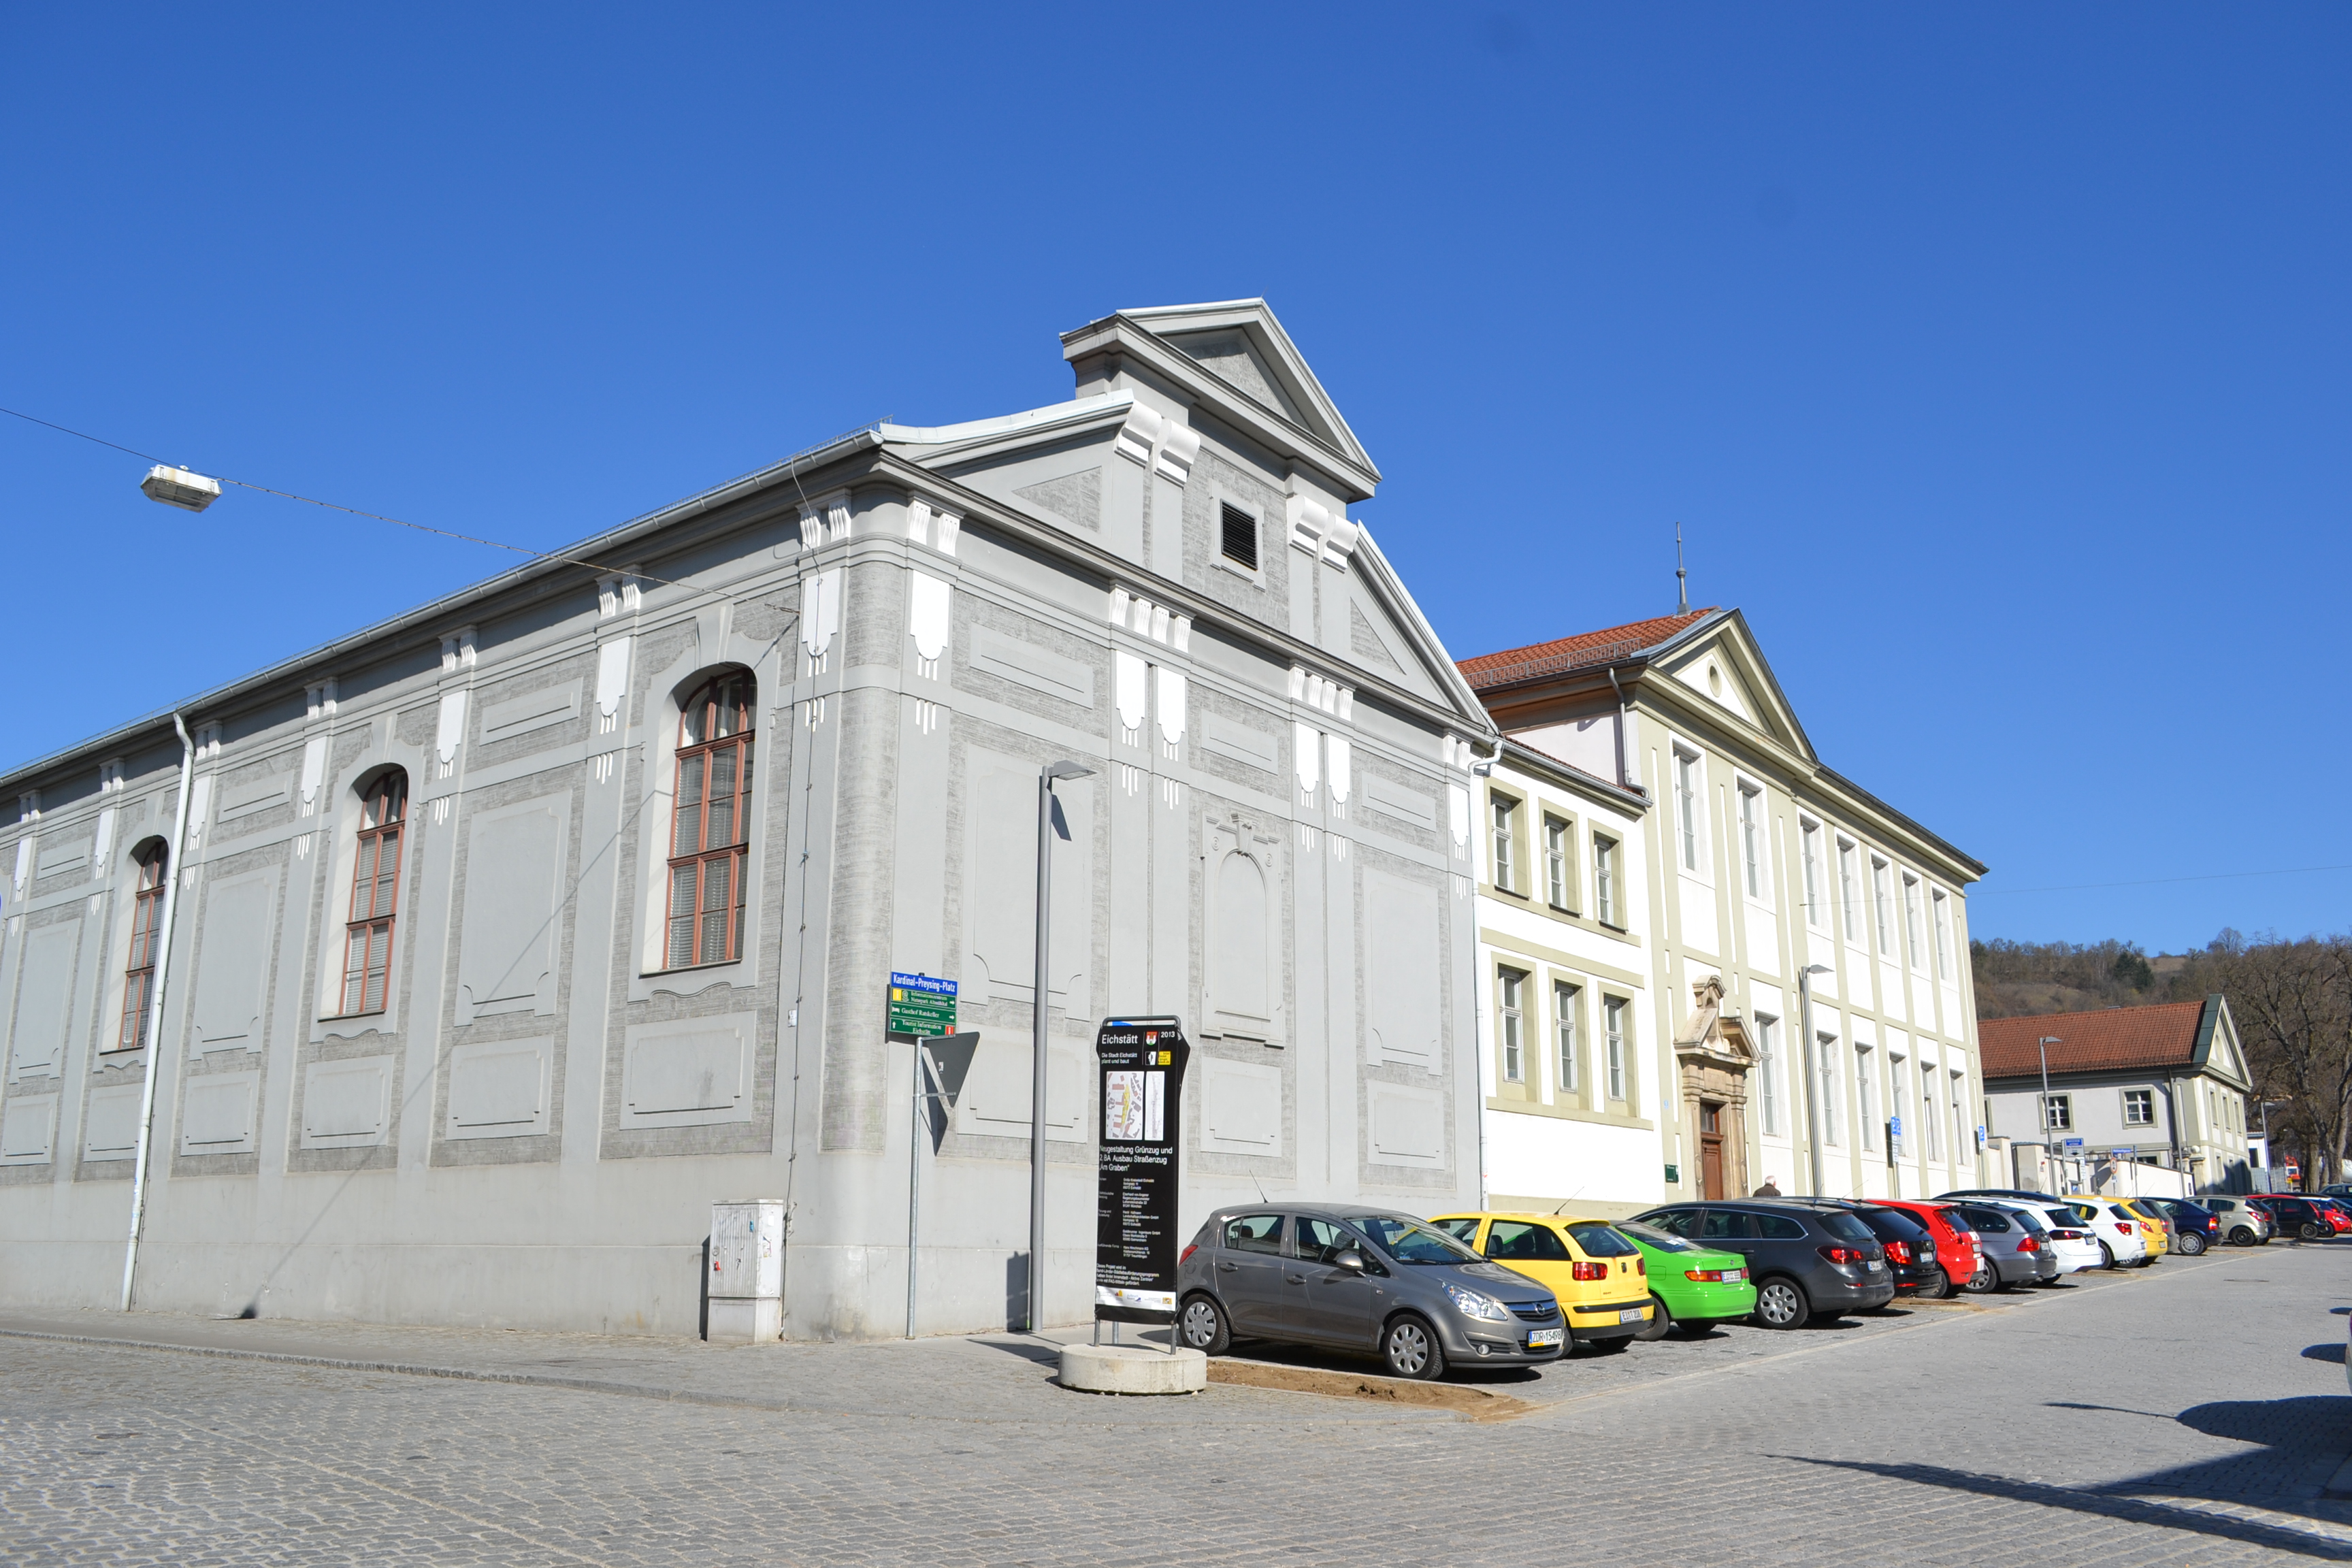 Historical buildings: Aula and former riding school